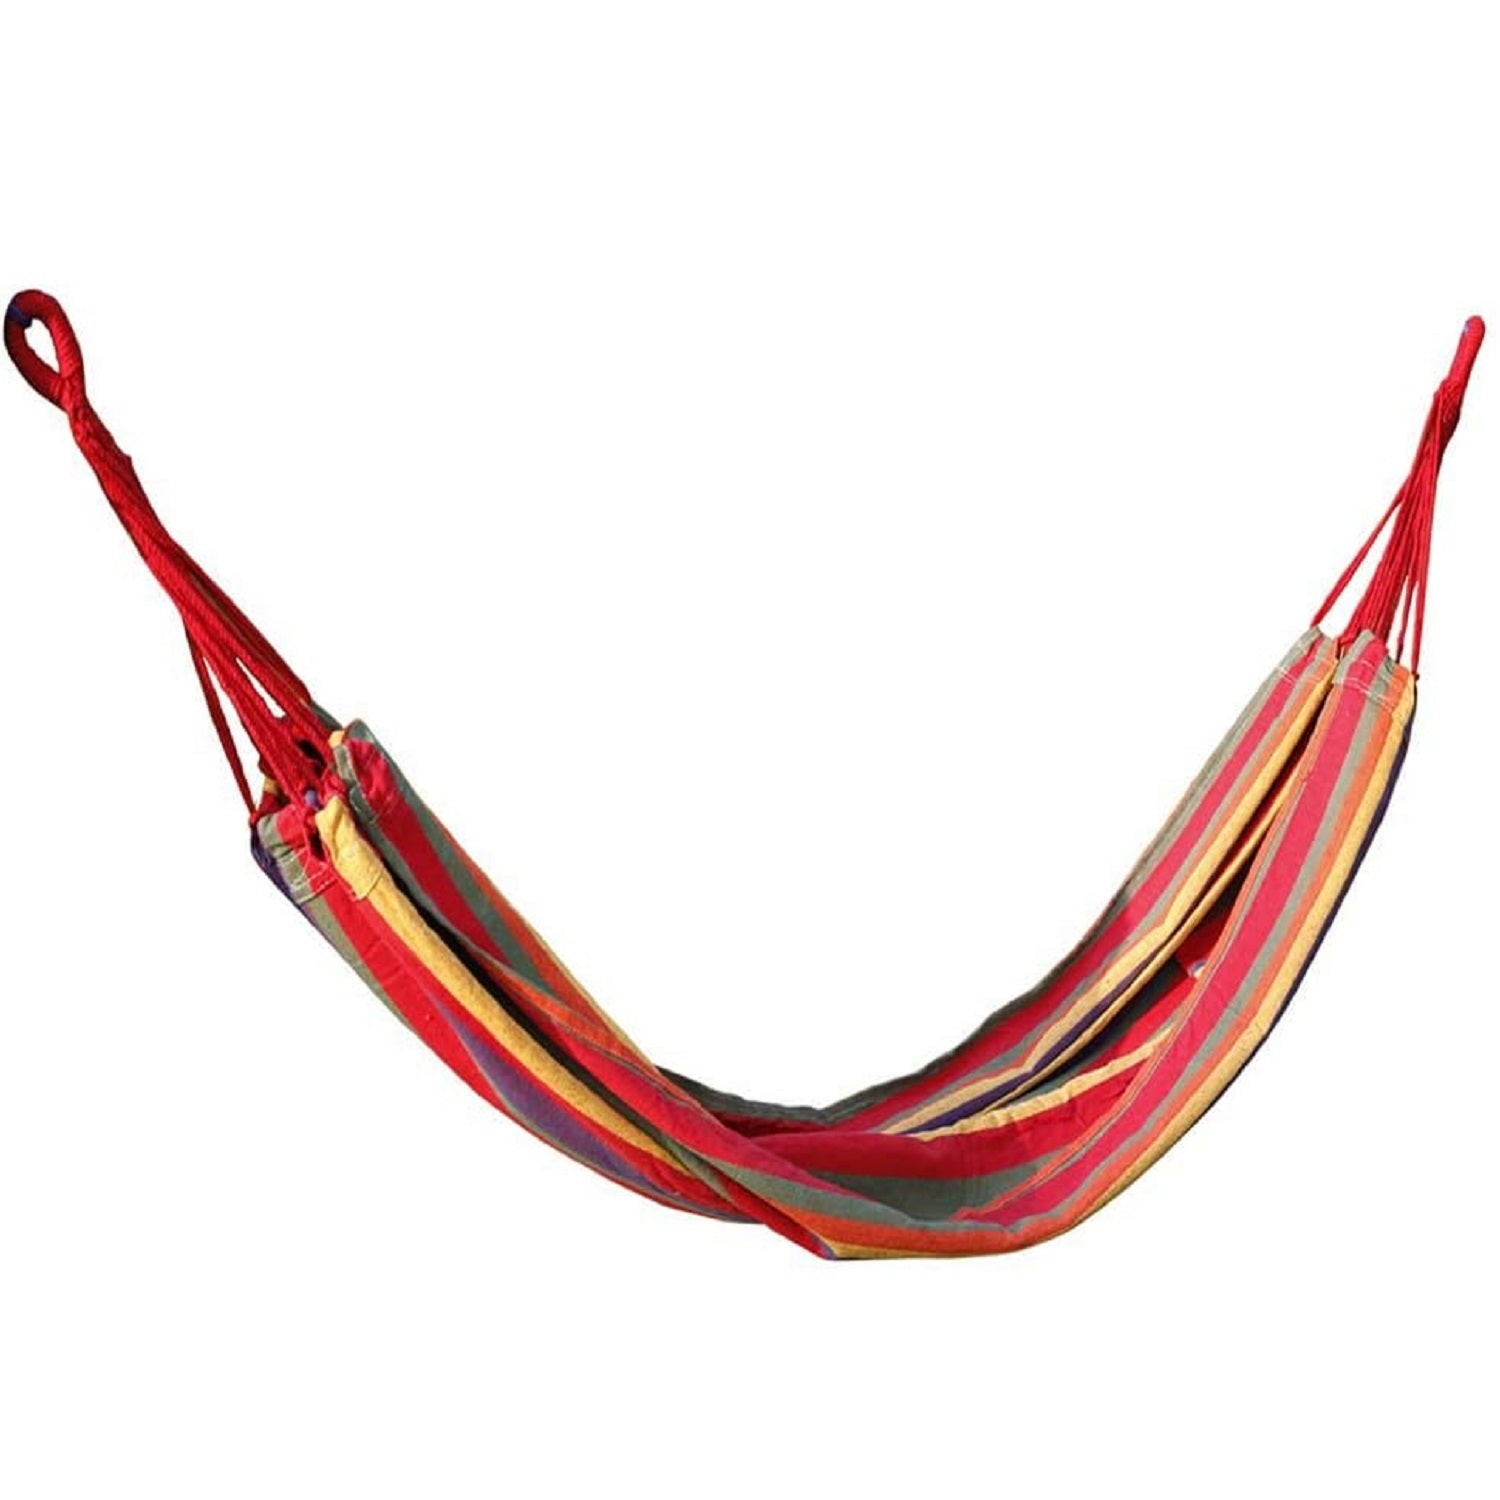 (Out of Stock) Camping Hammock Outdoor Indoor with Straps Travel Single Hammocks Cotton Fabric with Portable Bag Backpack